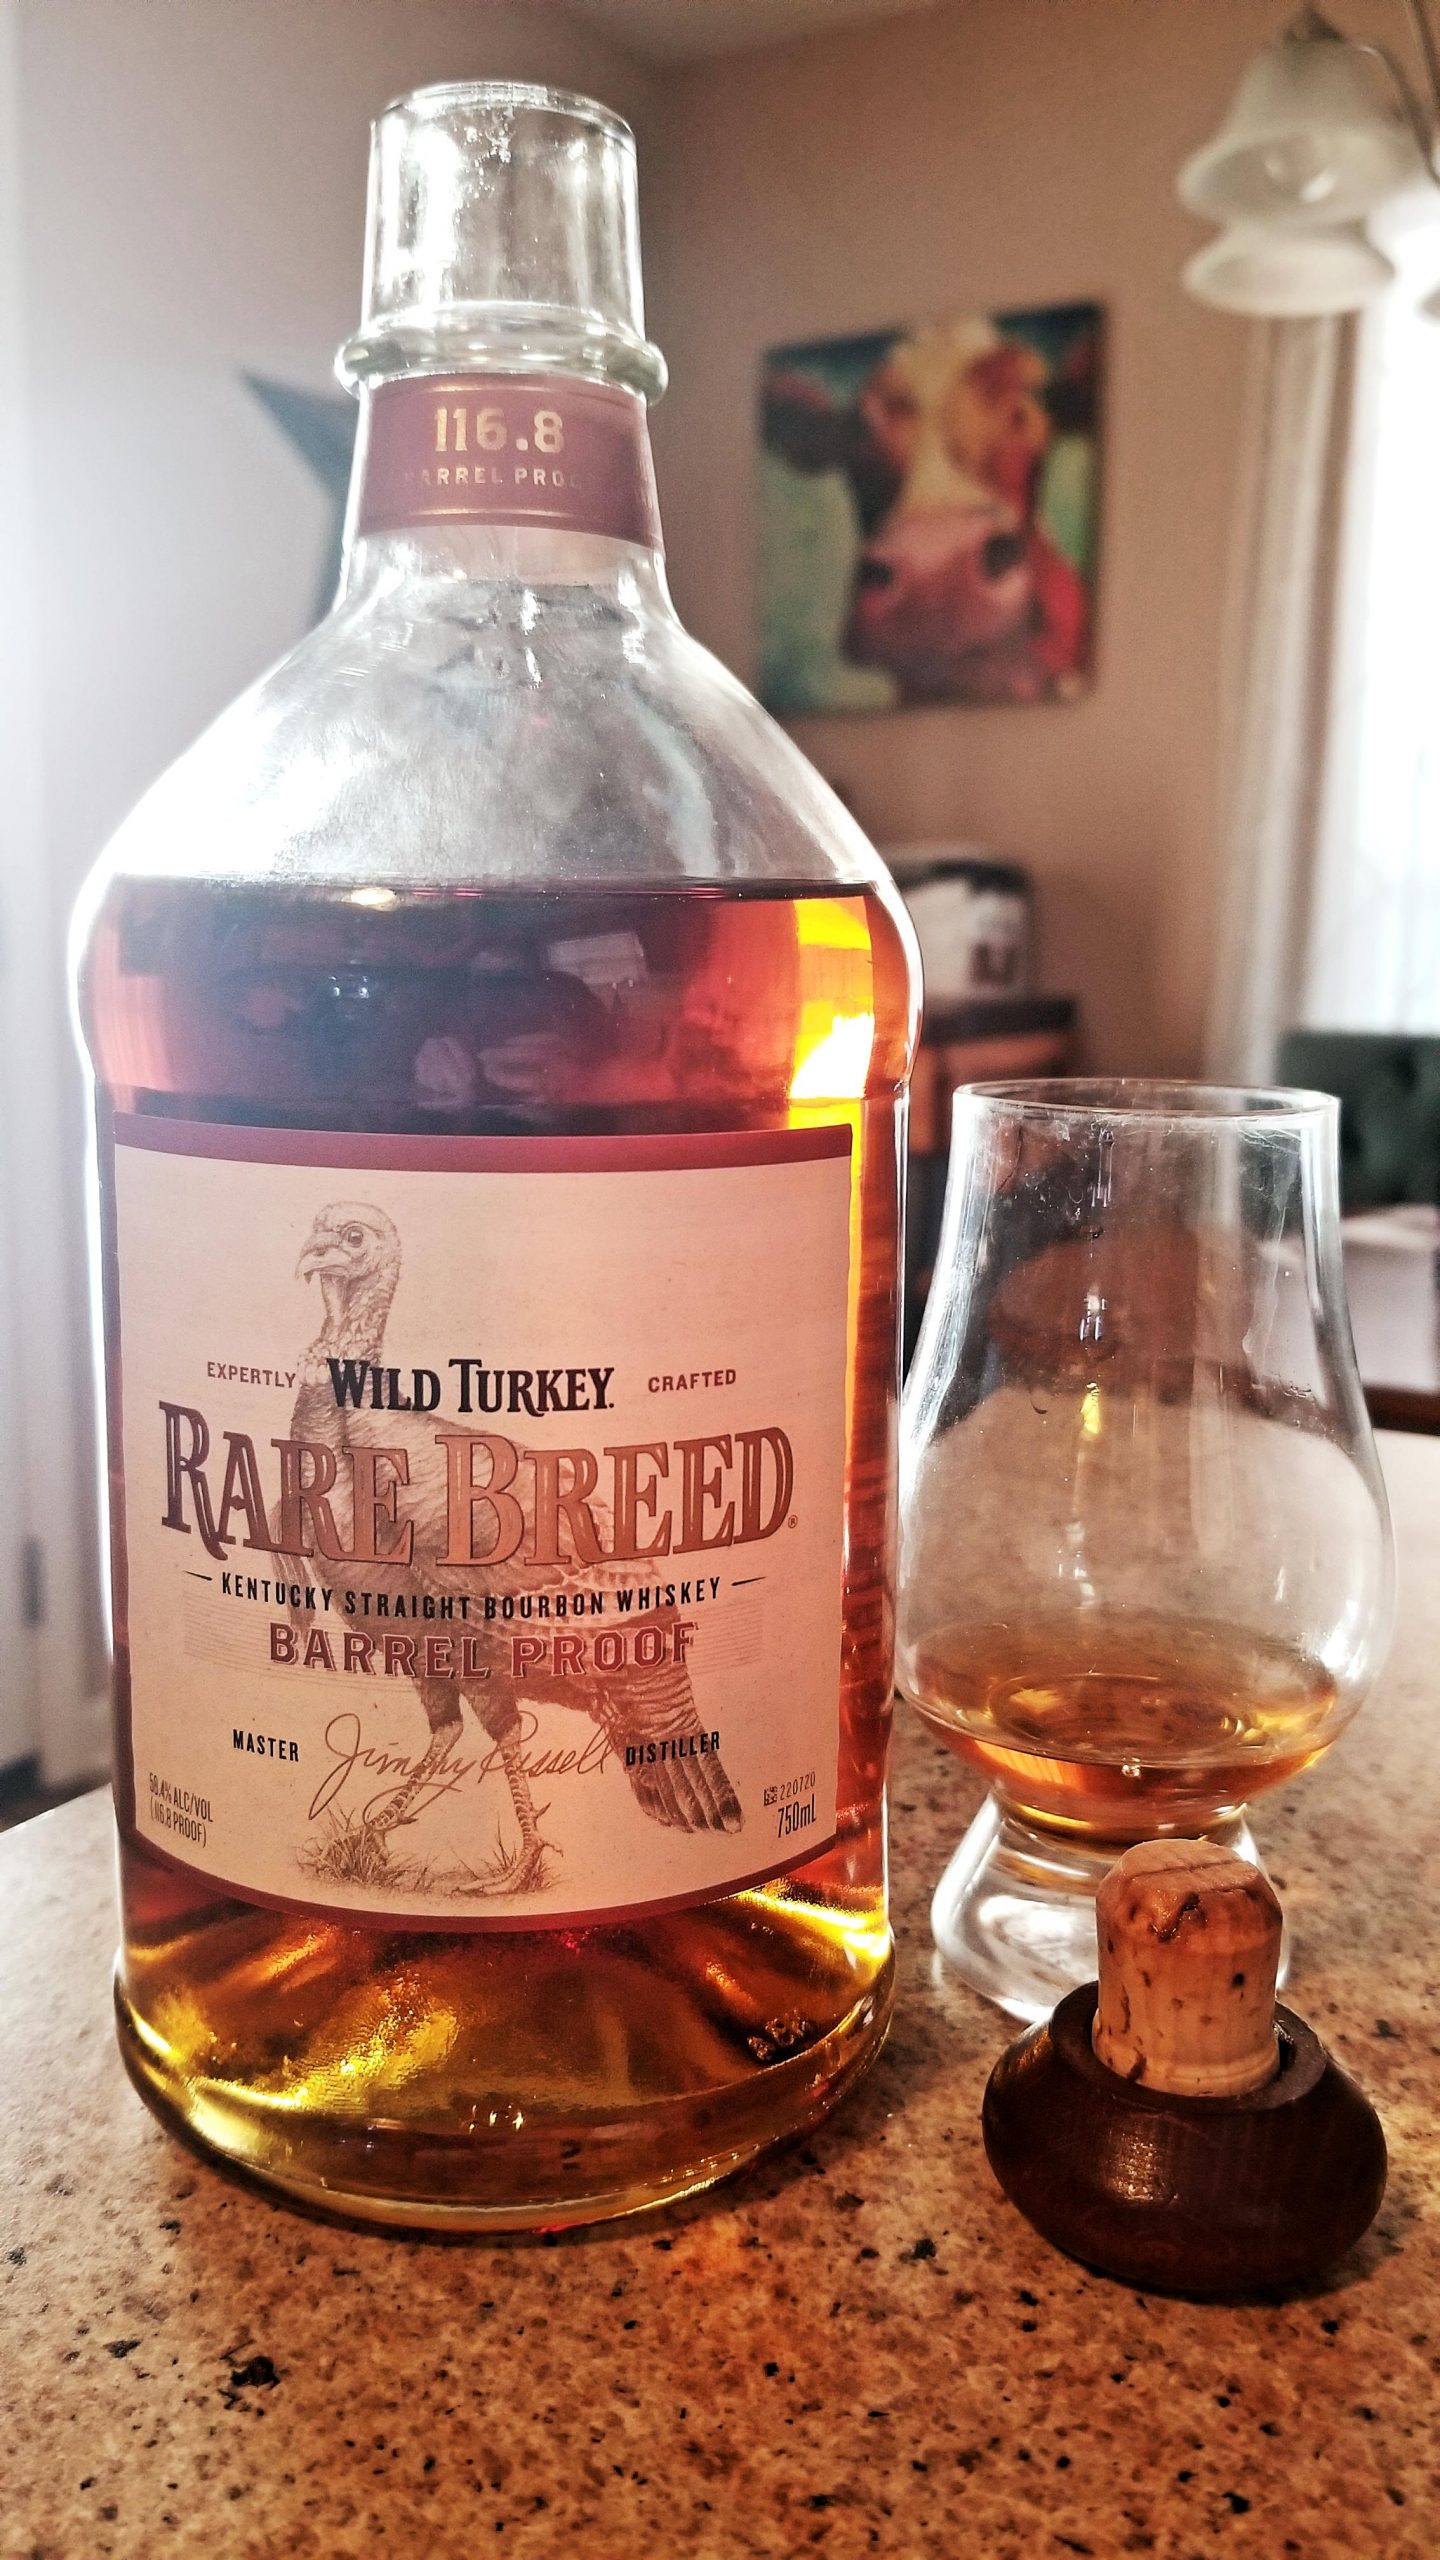 Review #23